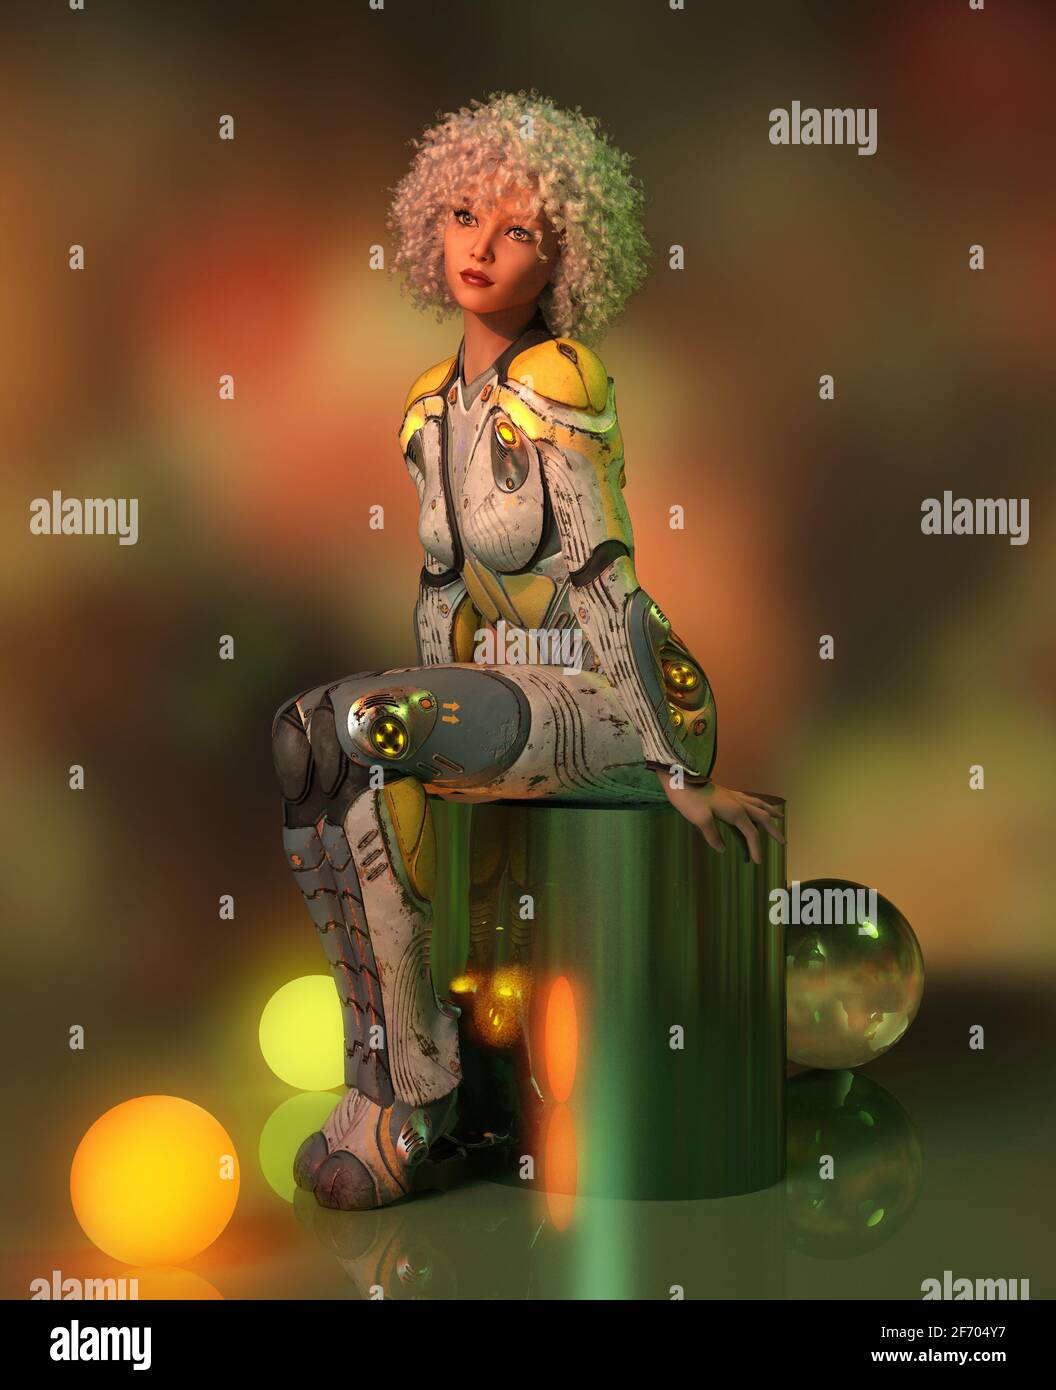 3d computer graphics of a girl with curly hair and a suit in science fiction style Stock Photo